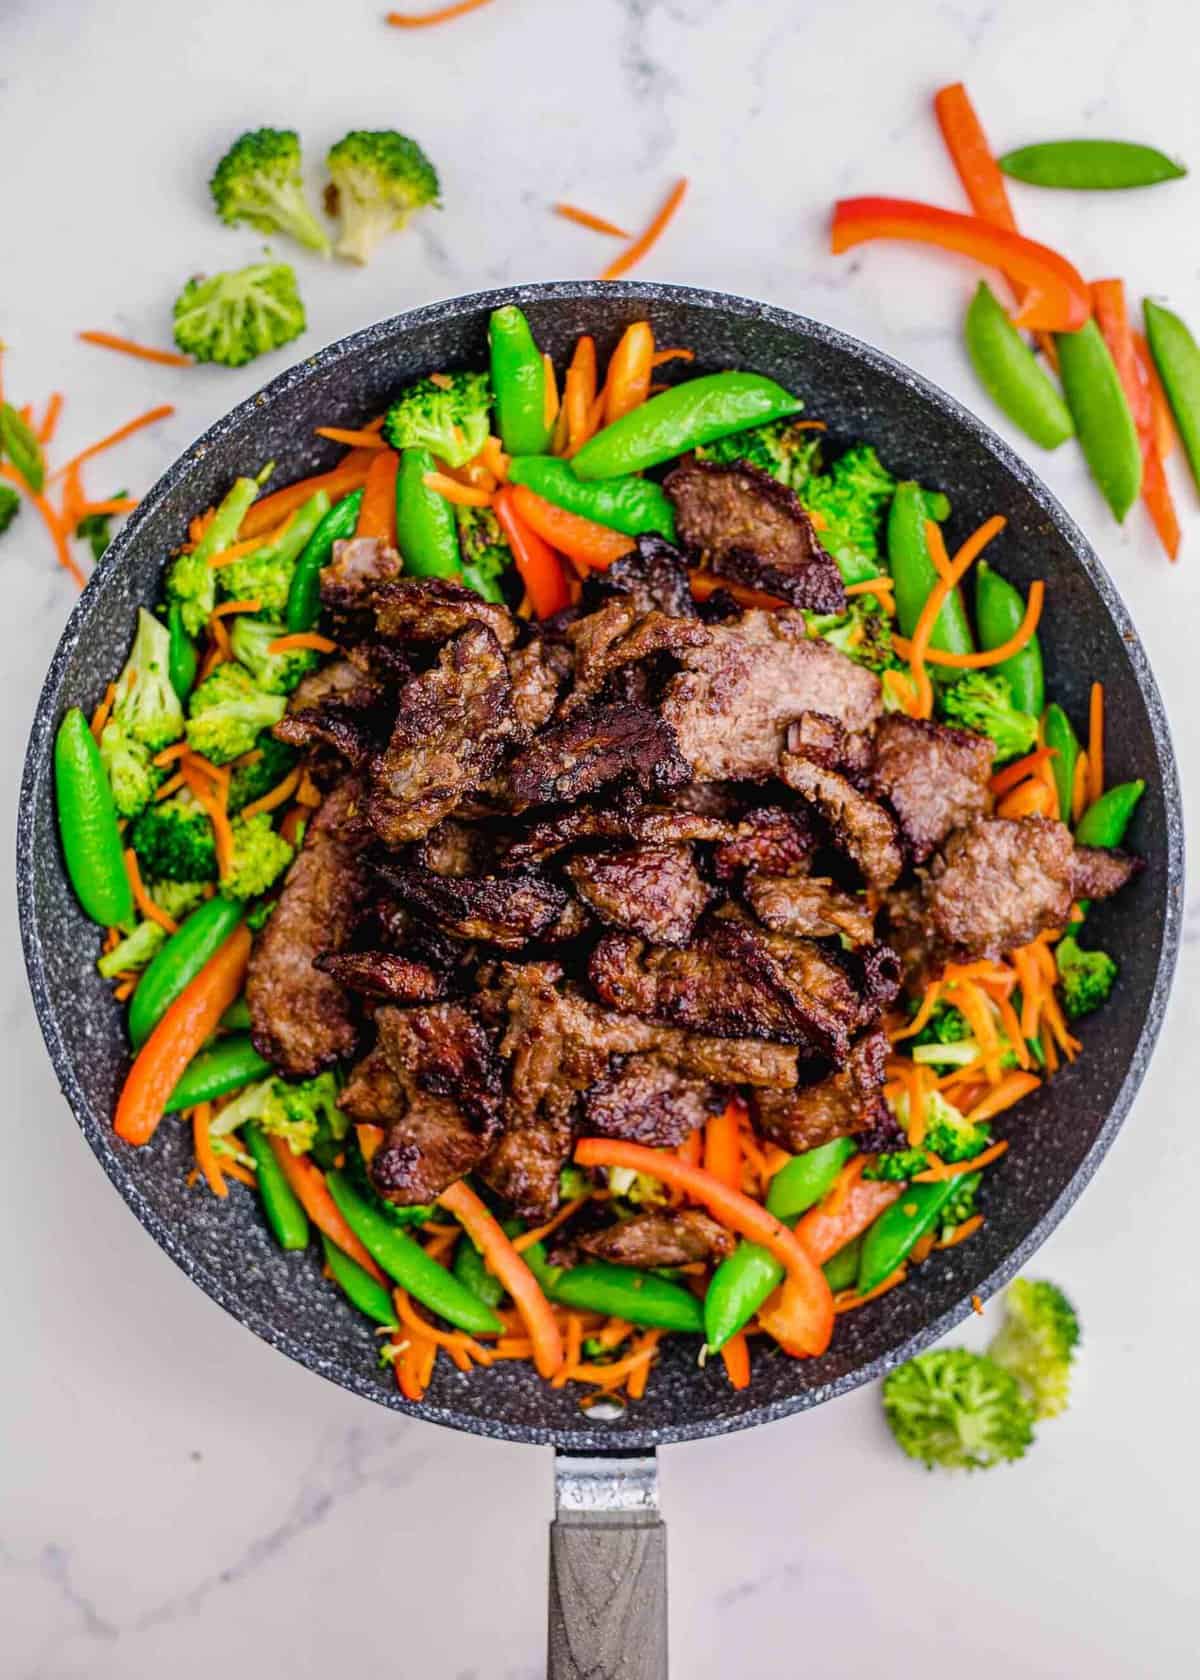 browned beef slices are added on top of cooked vegetables in a grey nonstick skillet